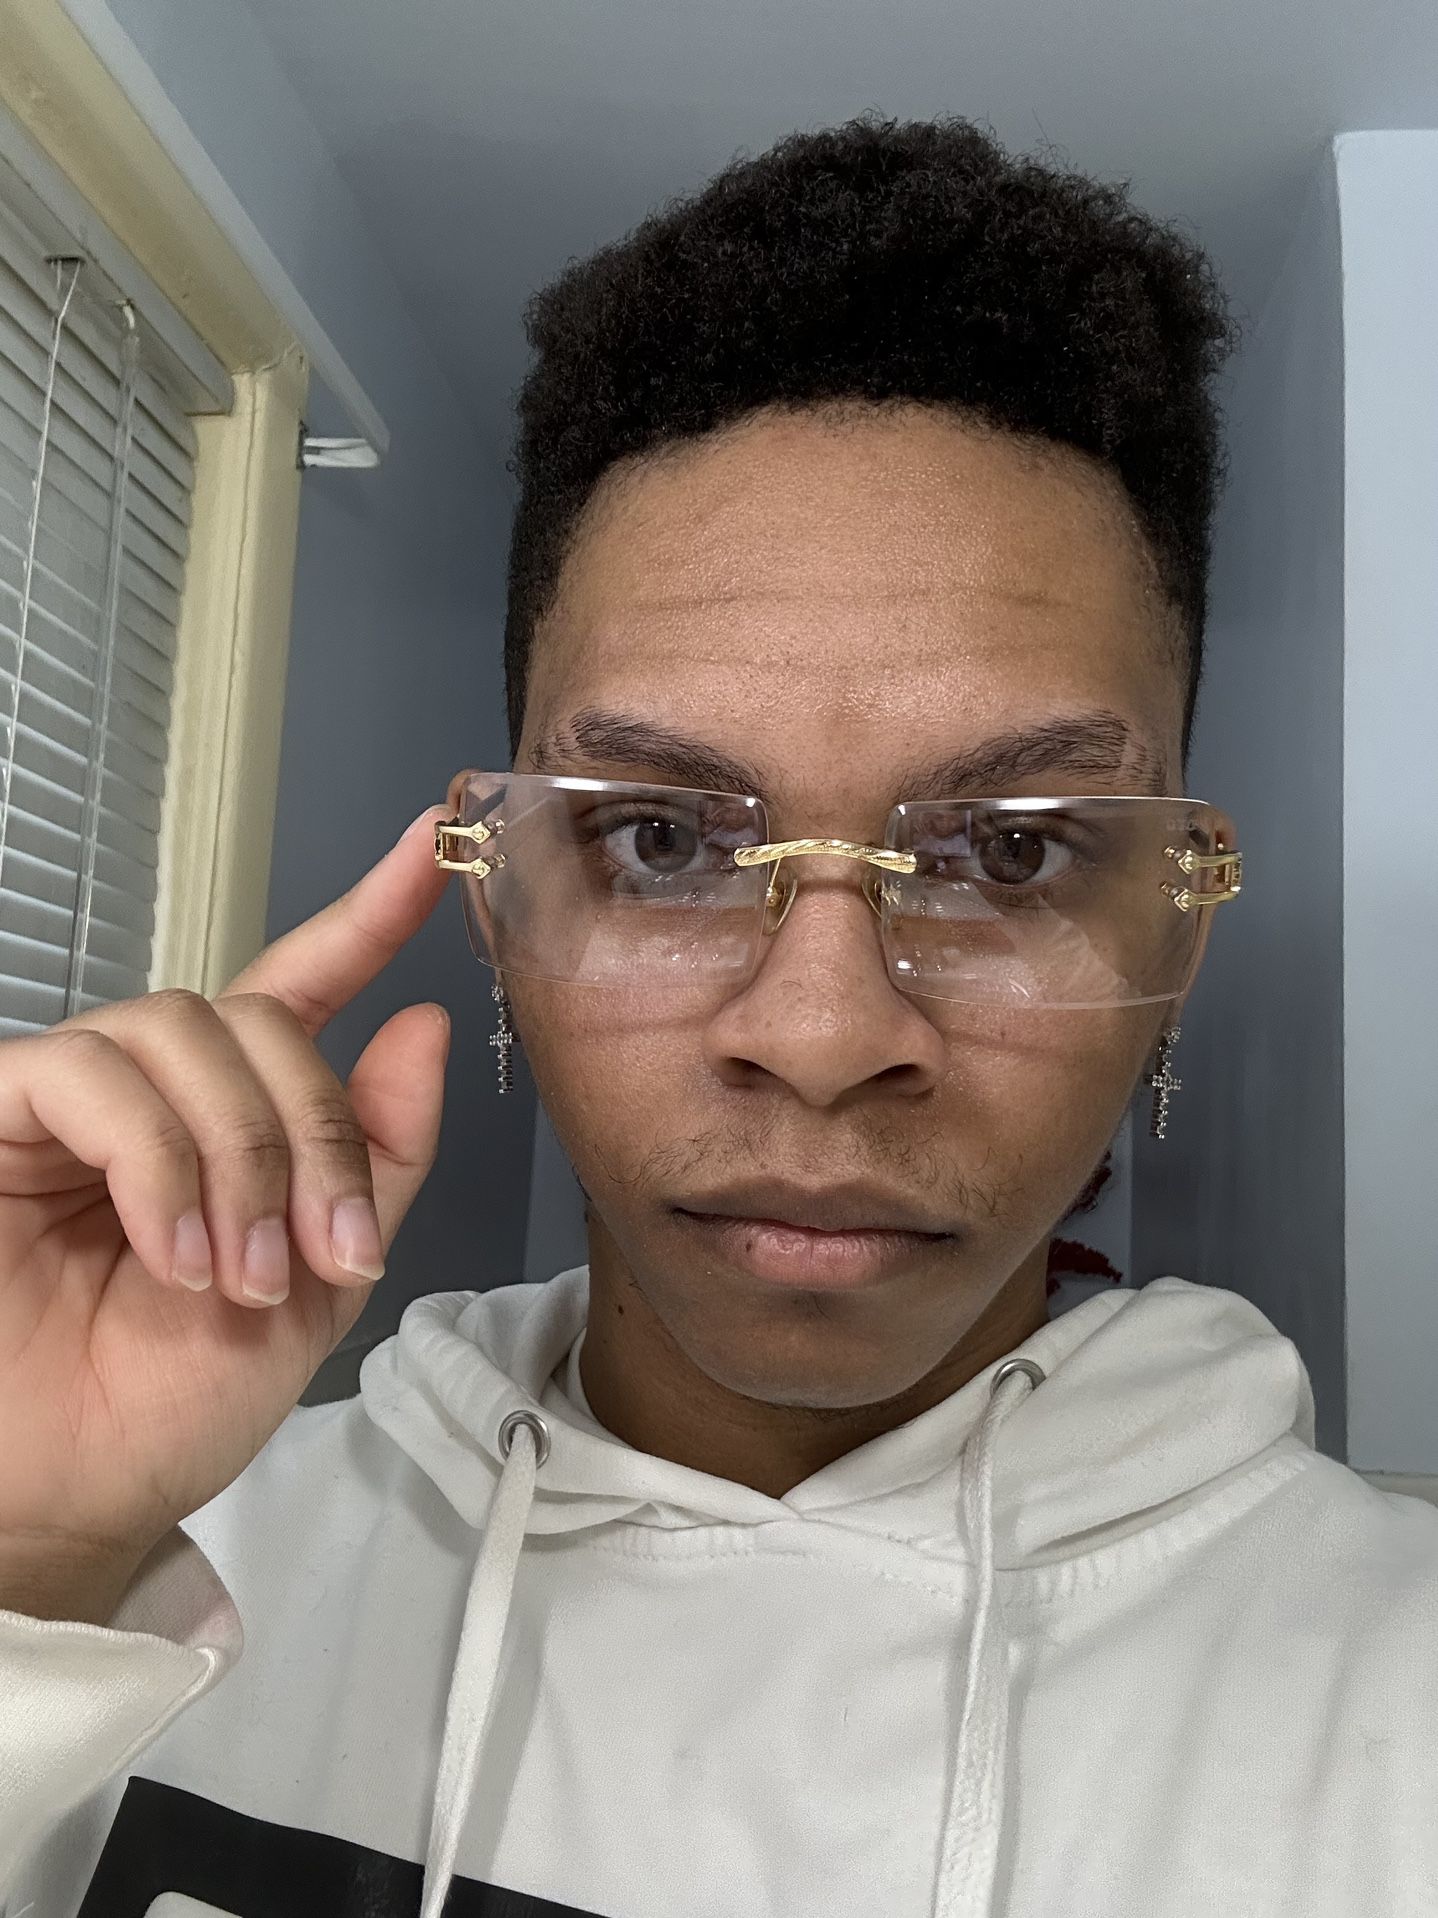 Designer Glasses Ask For Price Please for Sale in Houston, TX - OfferUp